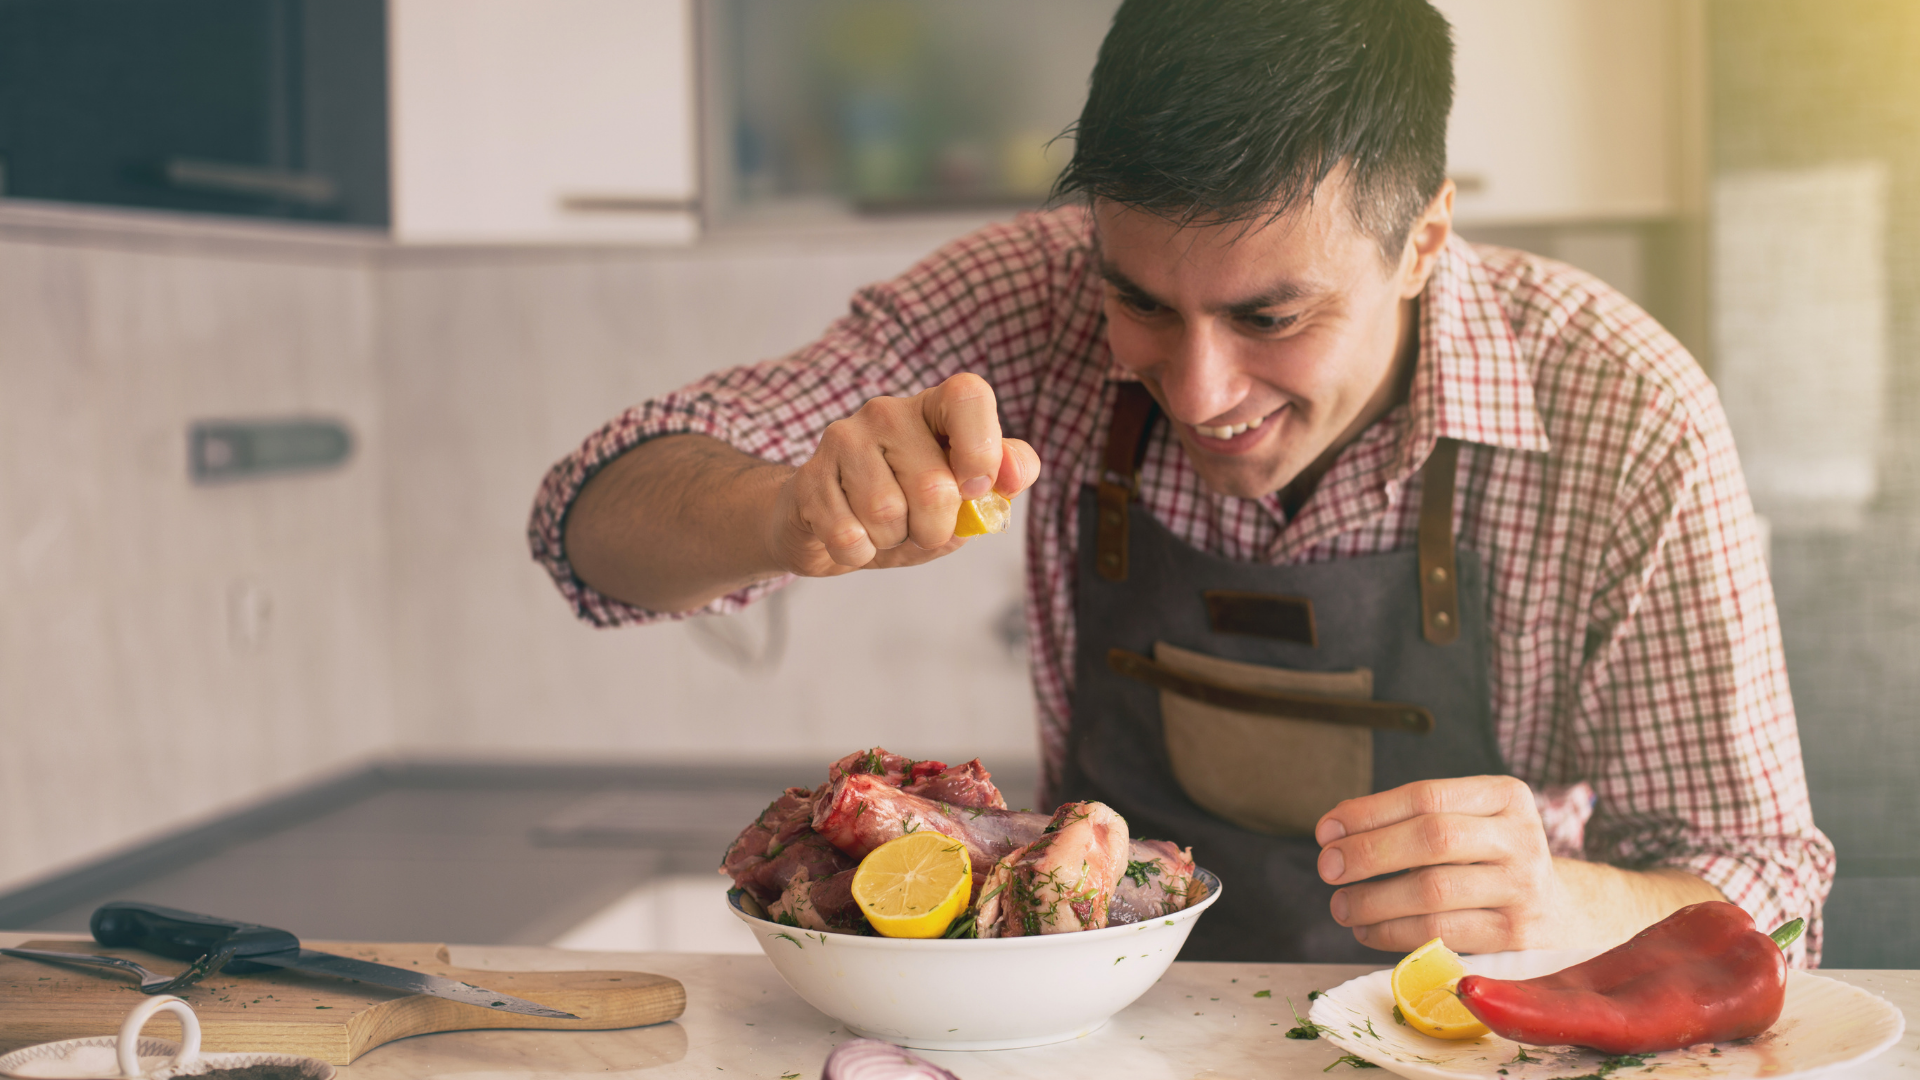 Man in apron squeezing lemon juice over meal he has made